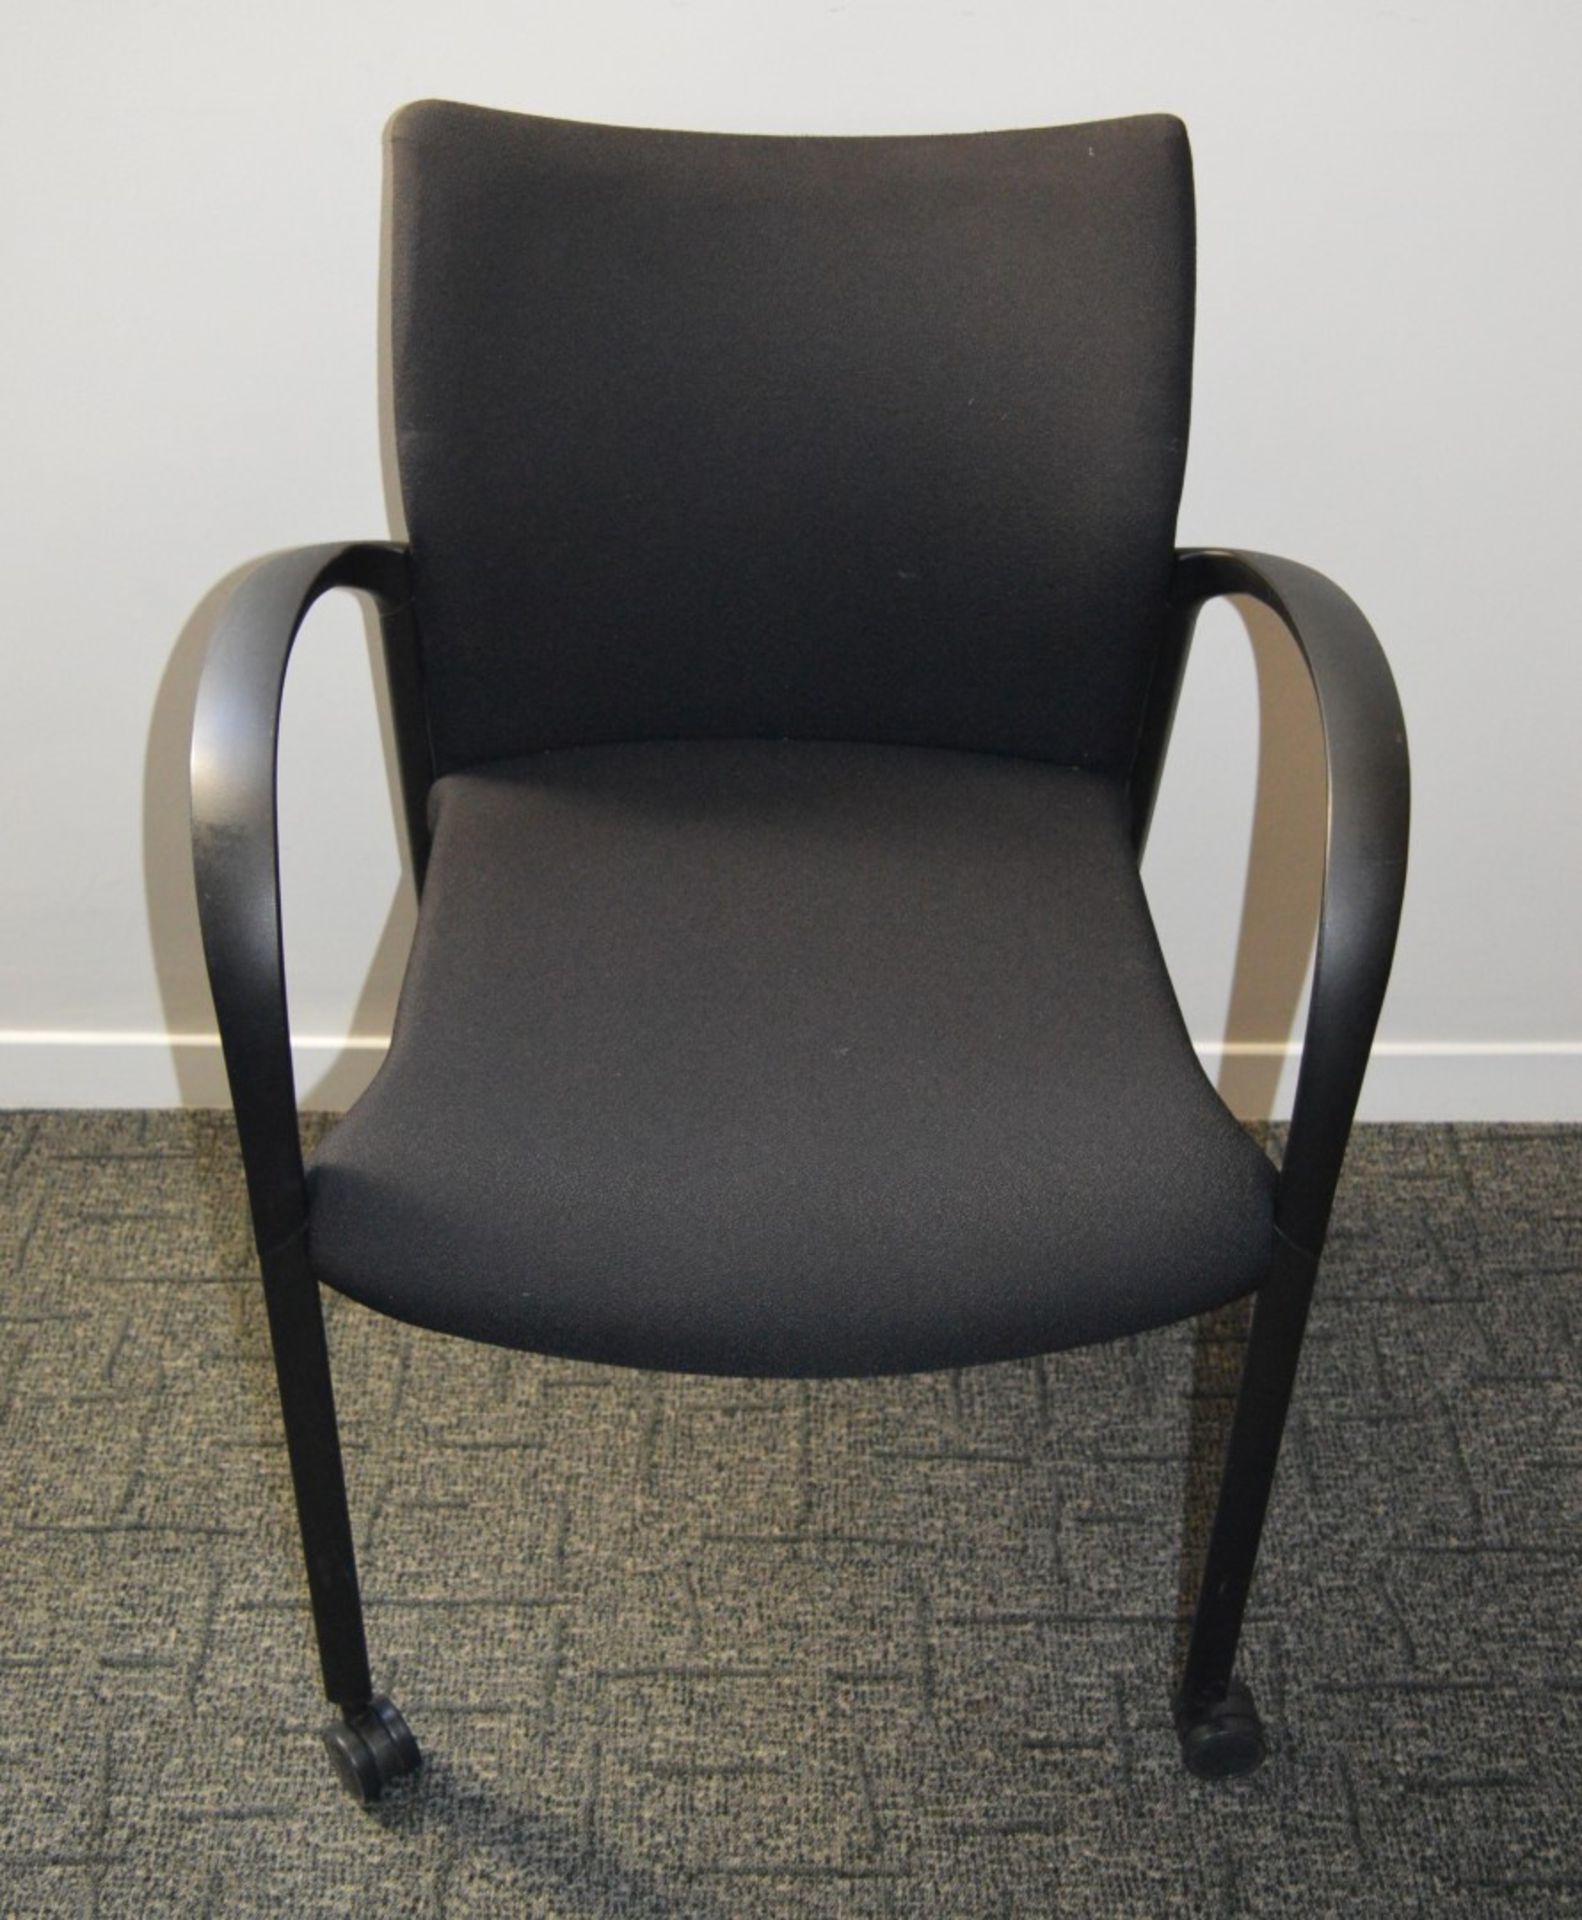 4 x Senator T117A Havana Extreme Office Chairs - Fully Upholstered With Black Frame, Arm Rests and - Image 3 of 6